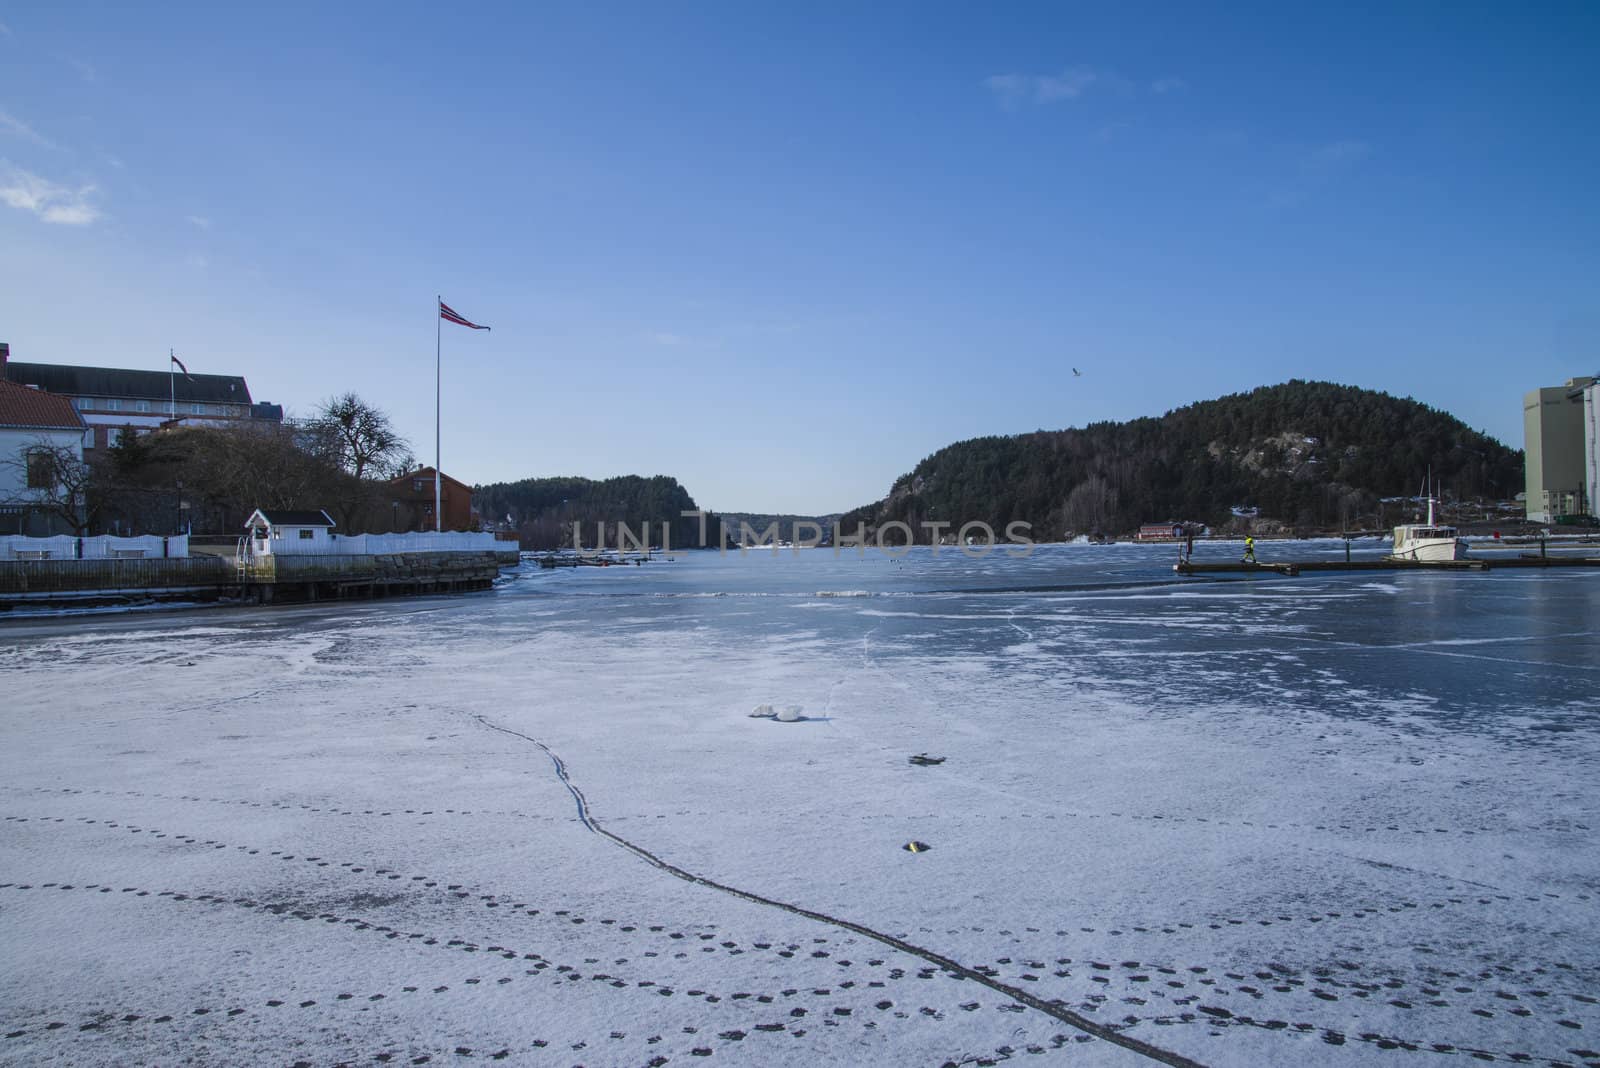 It's been a cold winter and the harbor of Halden, Norway is frozen into ice. The picture was shot one day in March 2013